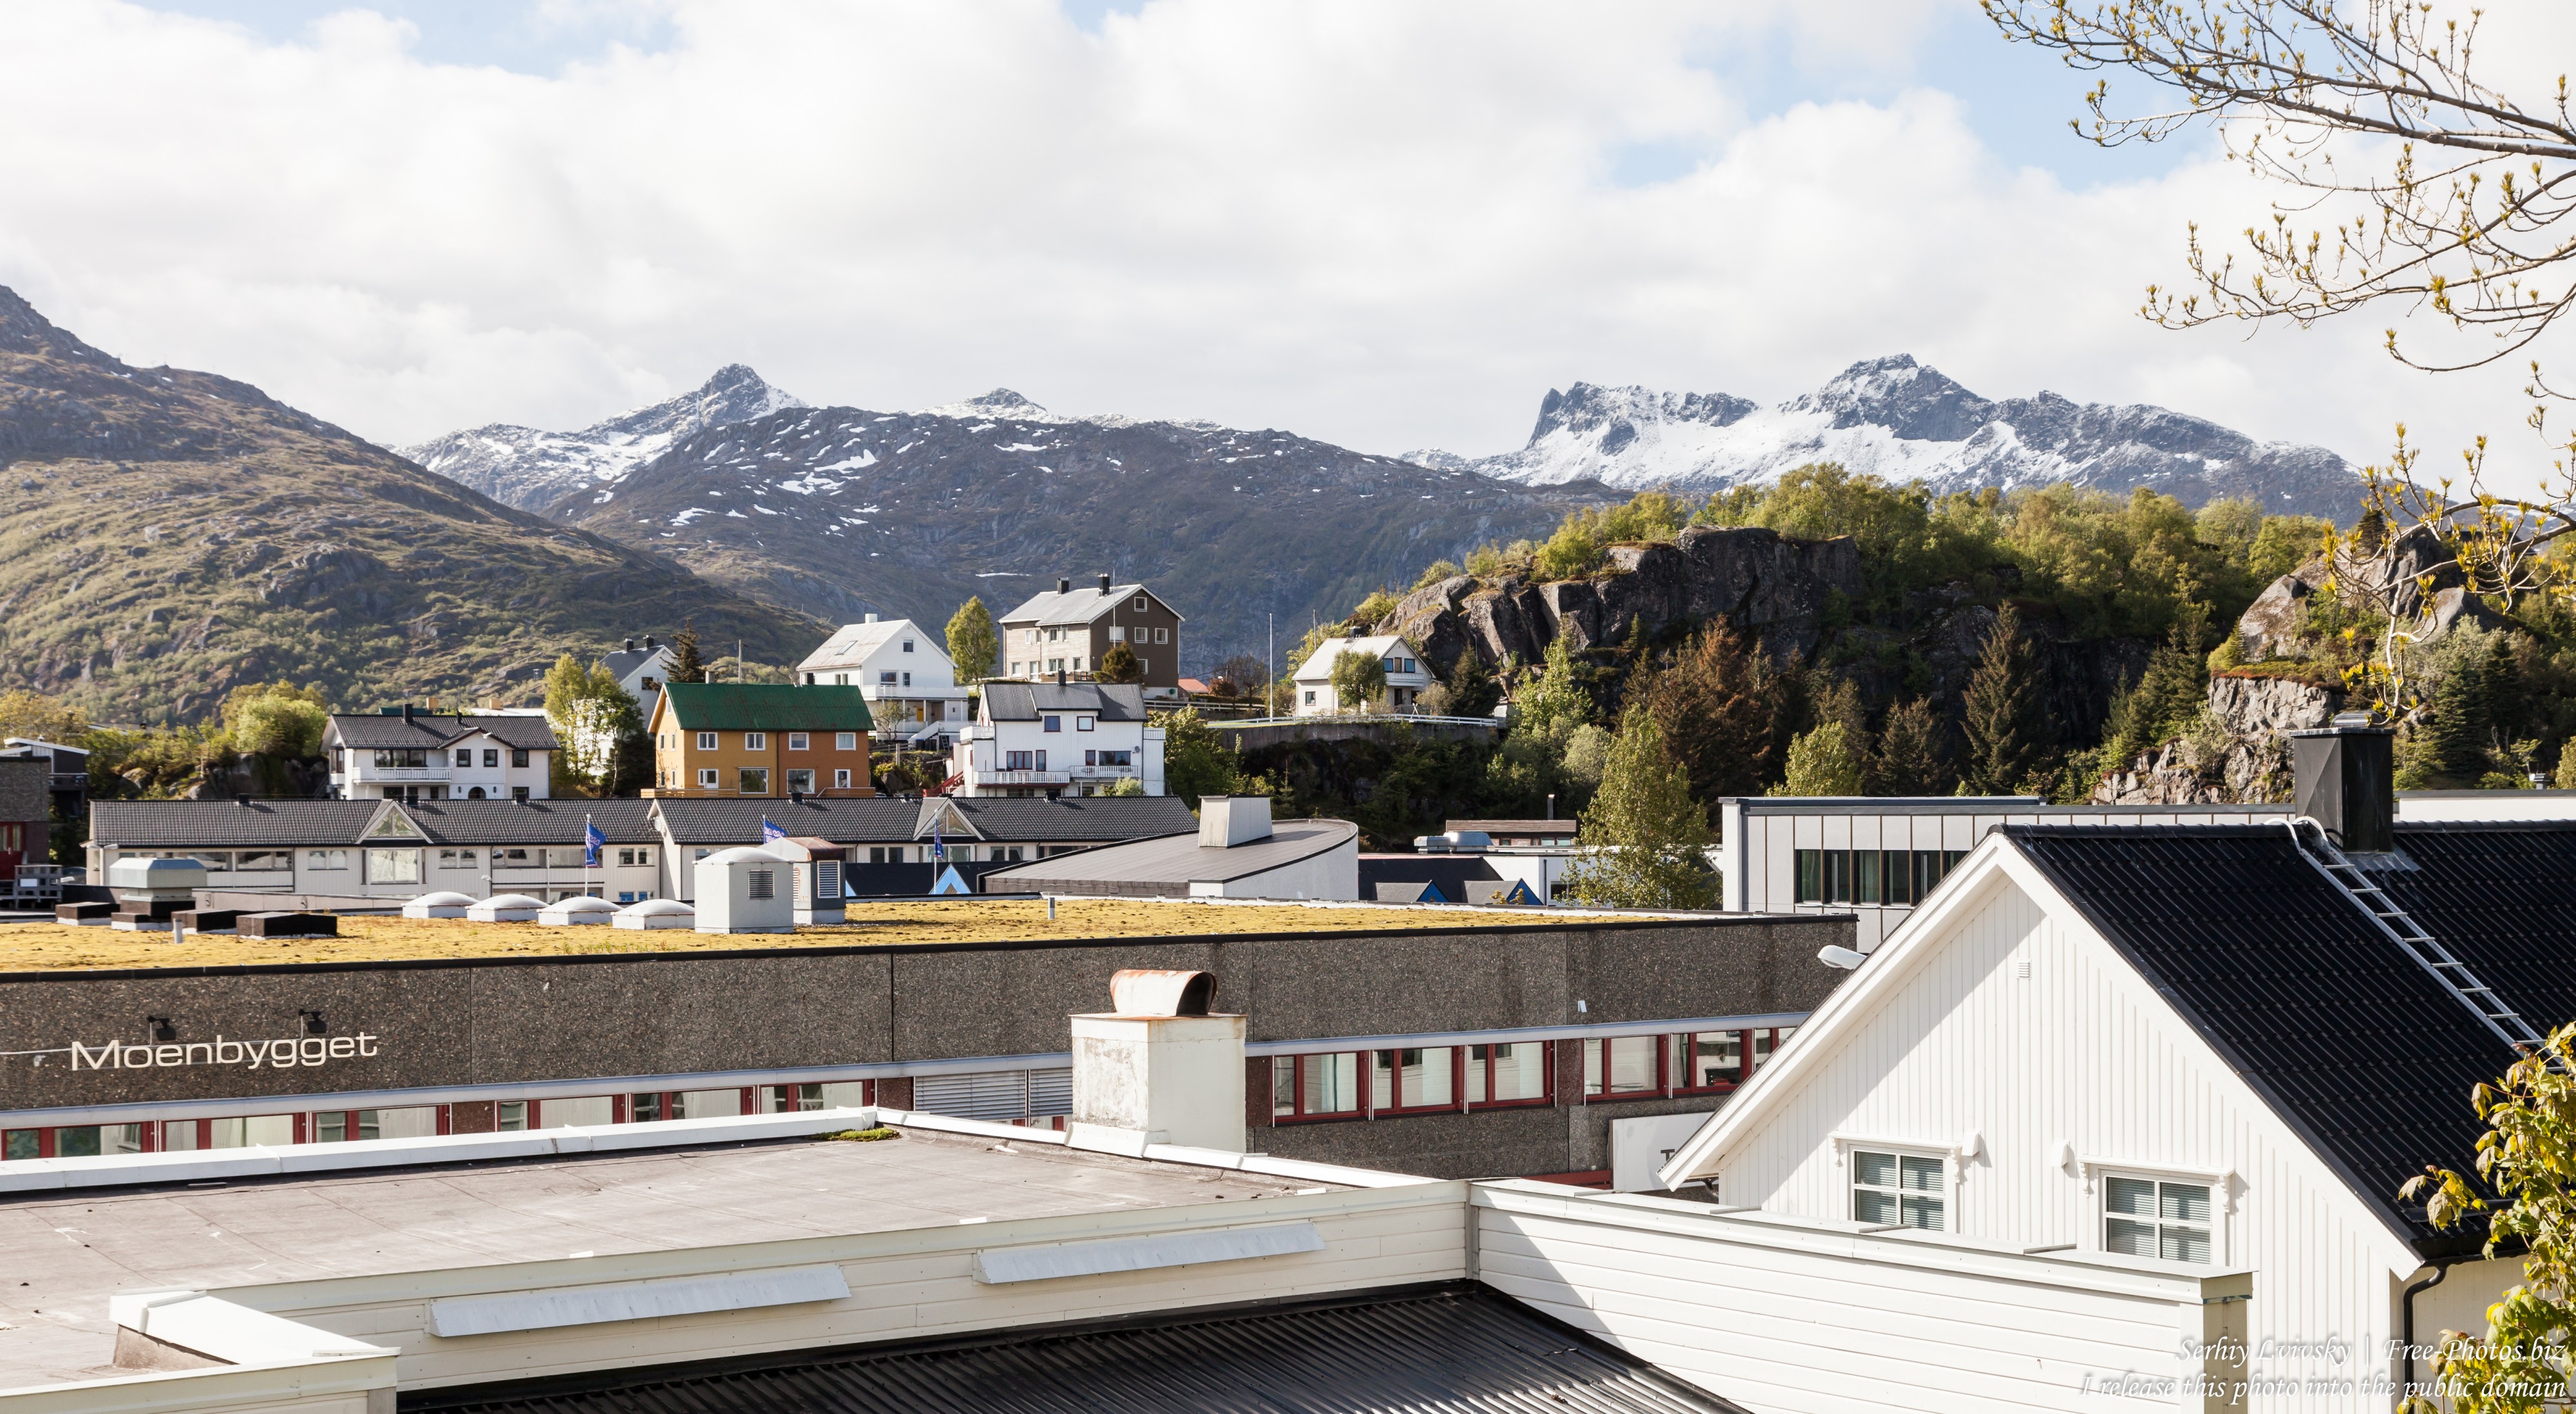 Svolvaer, Lofoten, Norway photographed in June 2018 by Serhiy Lvivsky, picture 18